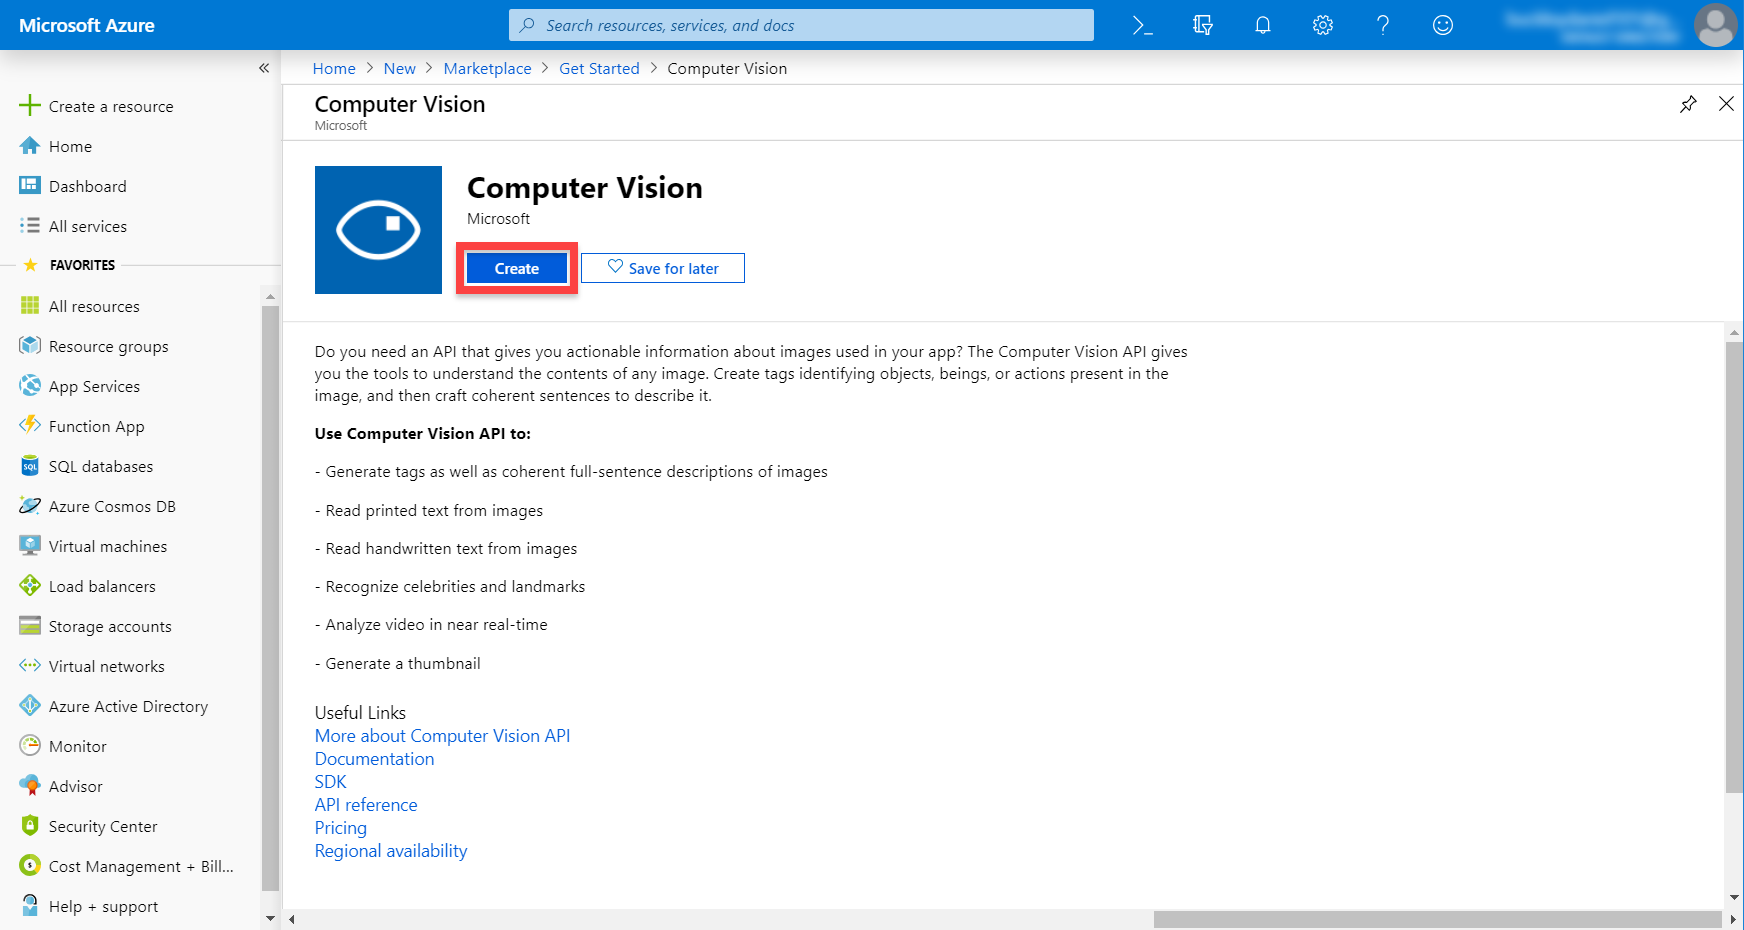 Microsoft Azure service page for Computer Vision